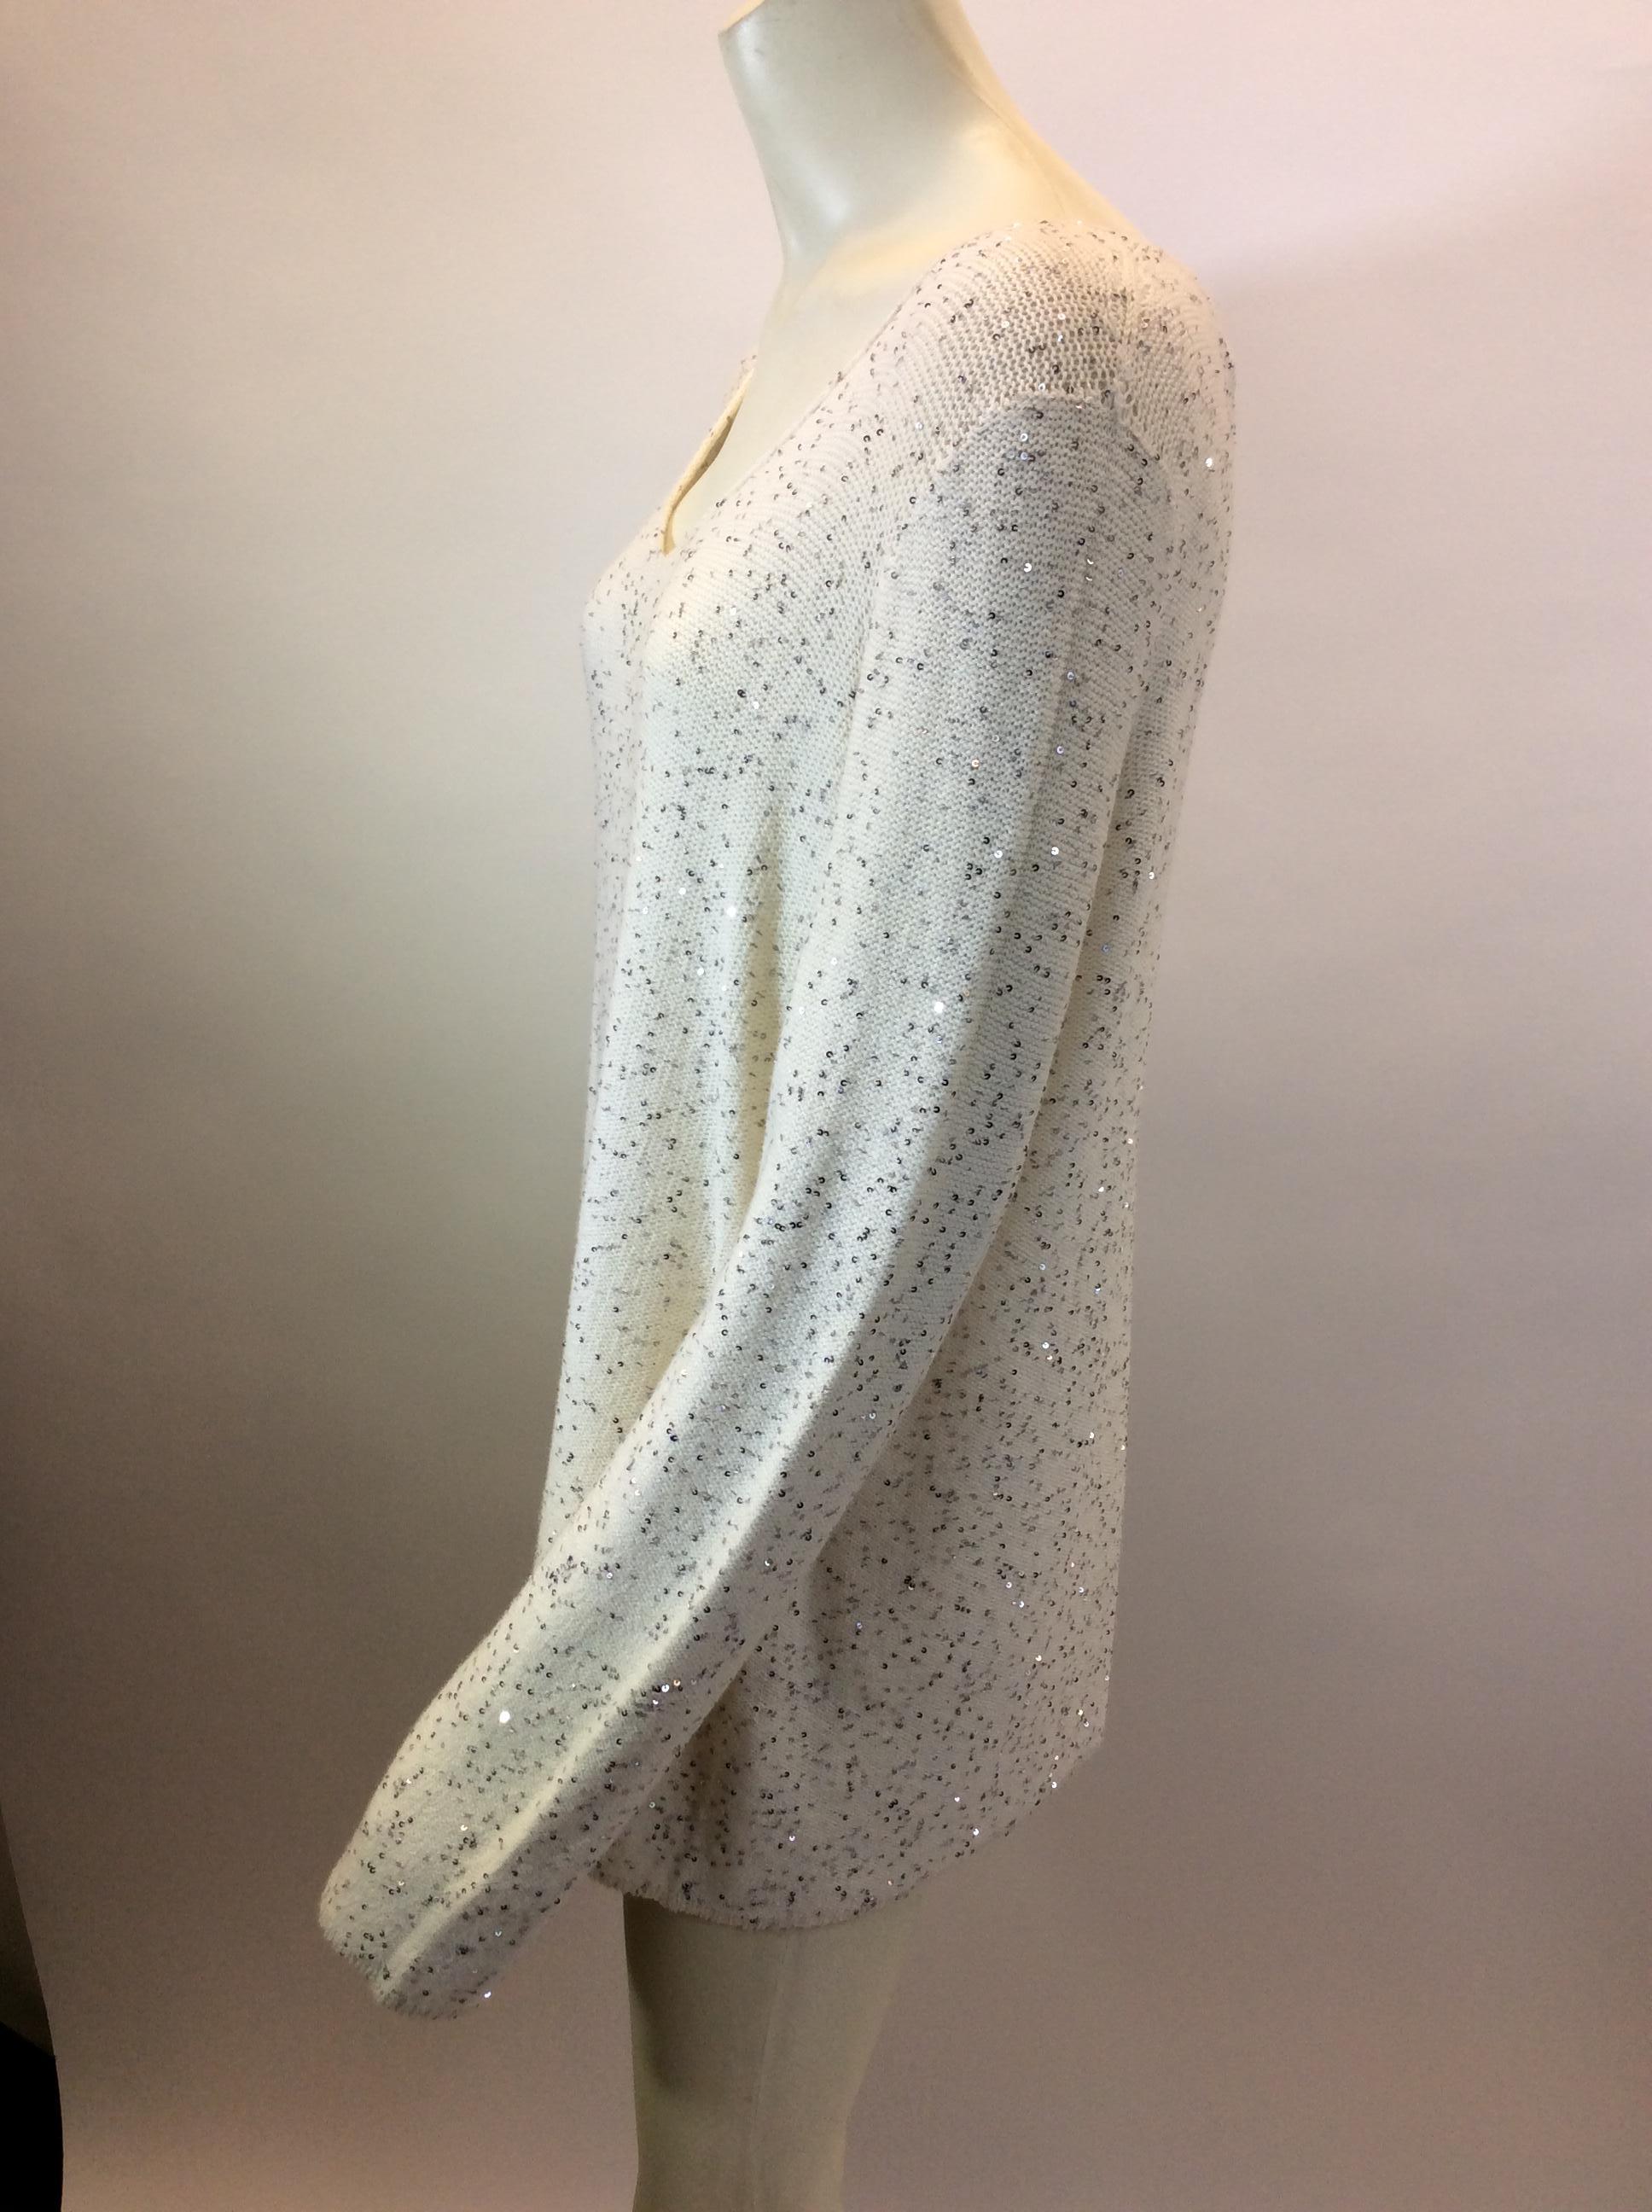 Armani White Sequin Sweater NWT
$450
Made in Italy
50% cotton, 30% polyamide, 10% cashmere, 10% polyester
Size 38
Length 26